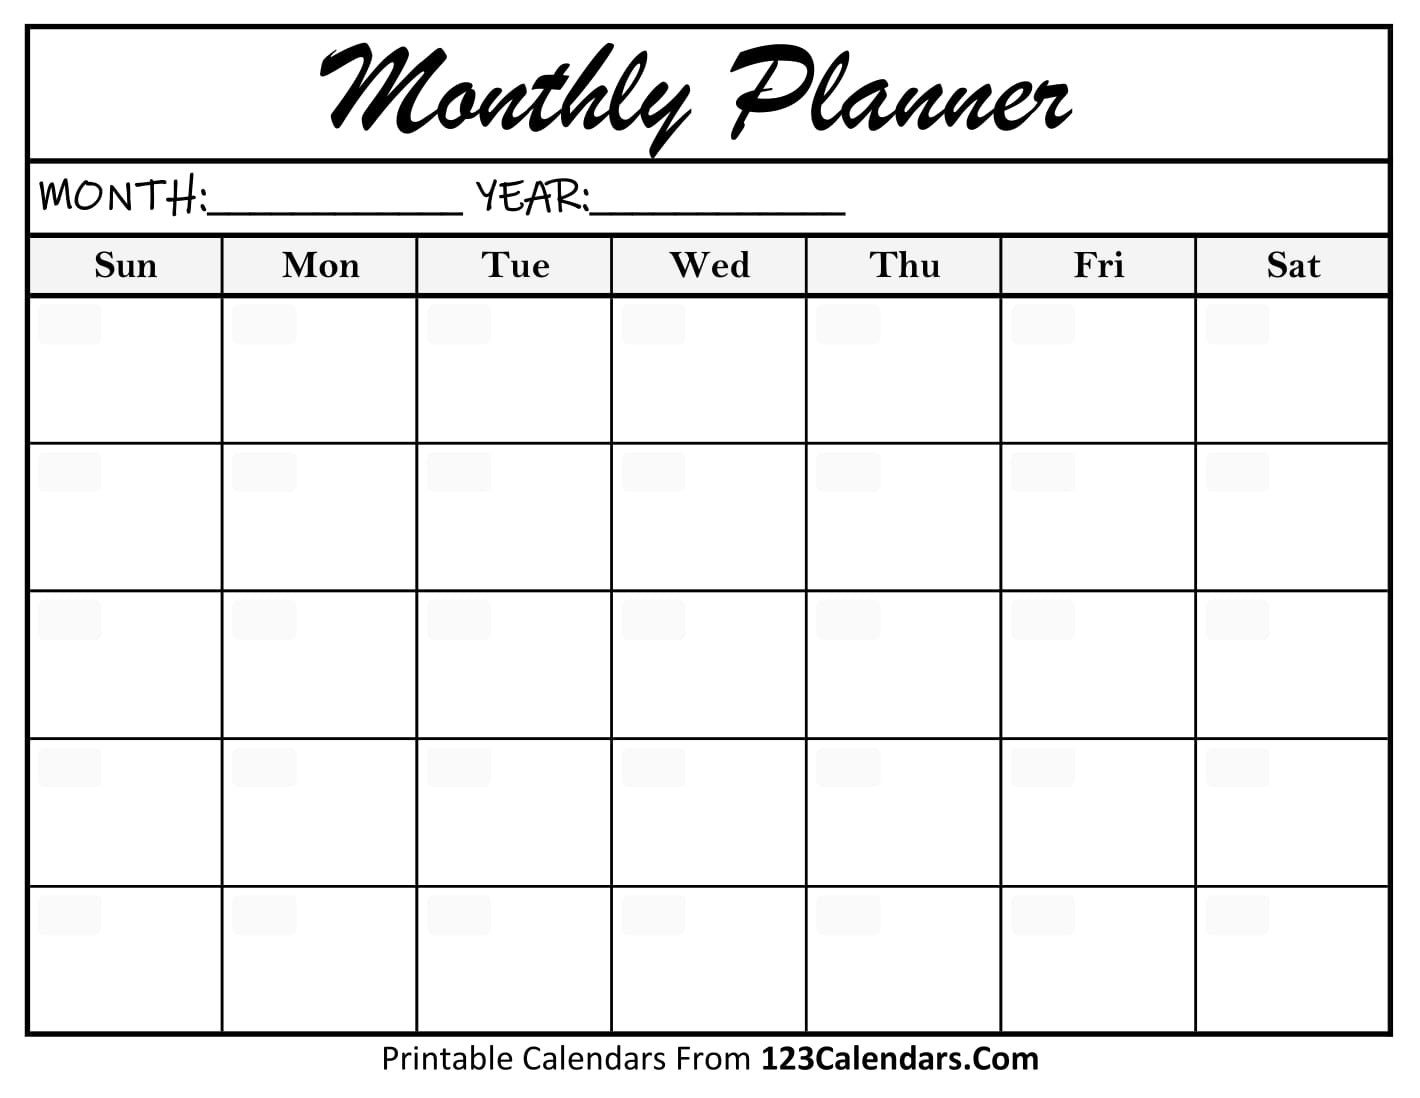 printable-monthly-planner-templates-123calendars